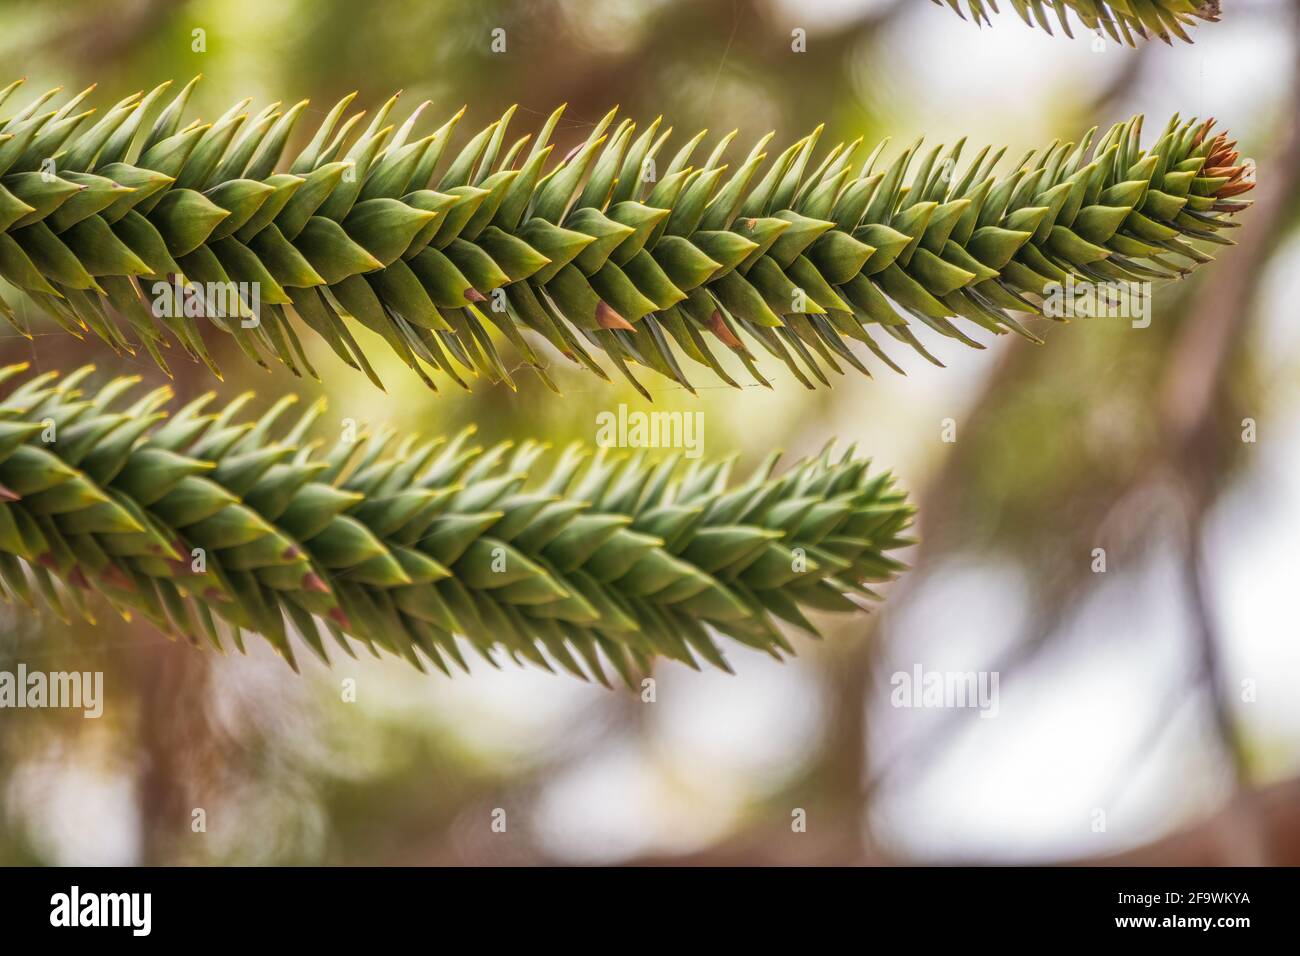 Needles of evergreen tree Araucaria araucana,commonly called the Monkey Puzzle Tree, Monkey Tail Tree, Pewen or Chilean Pine Stock Photo